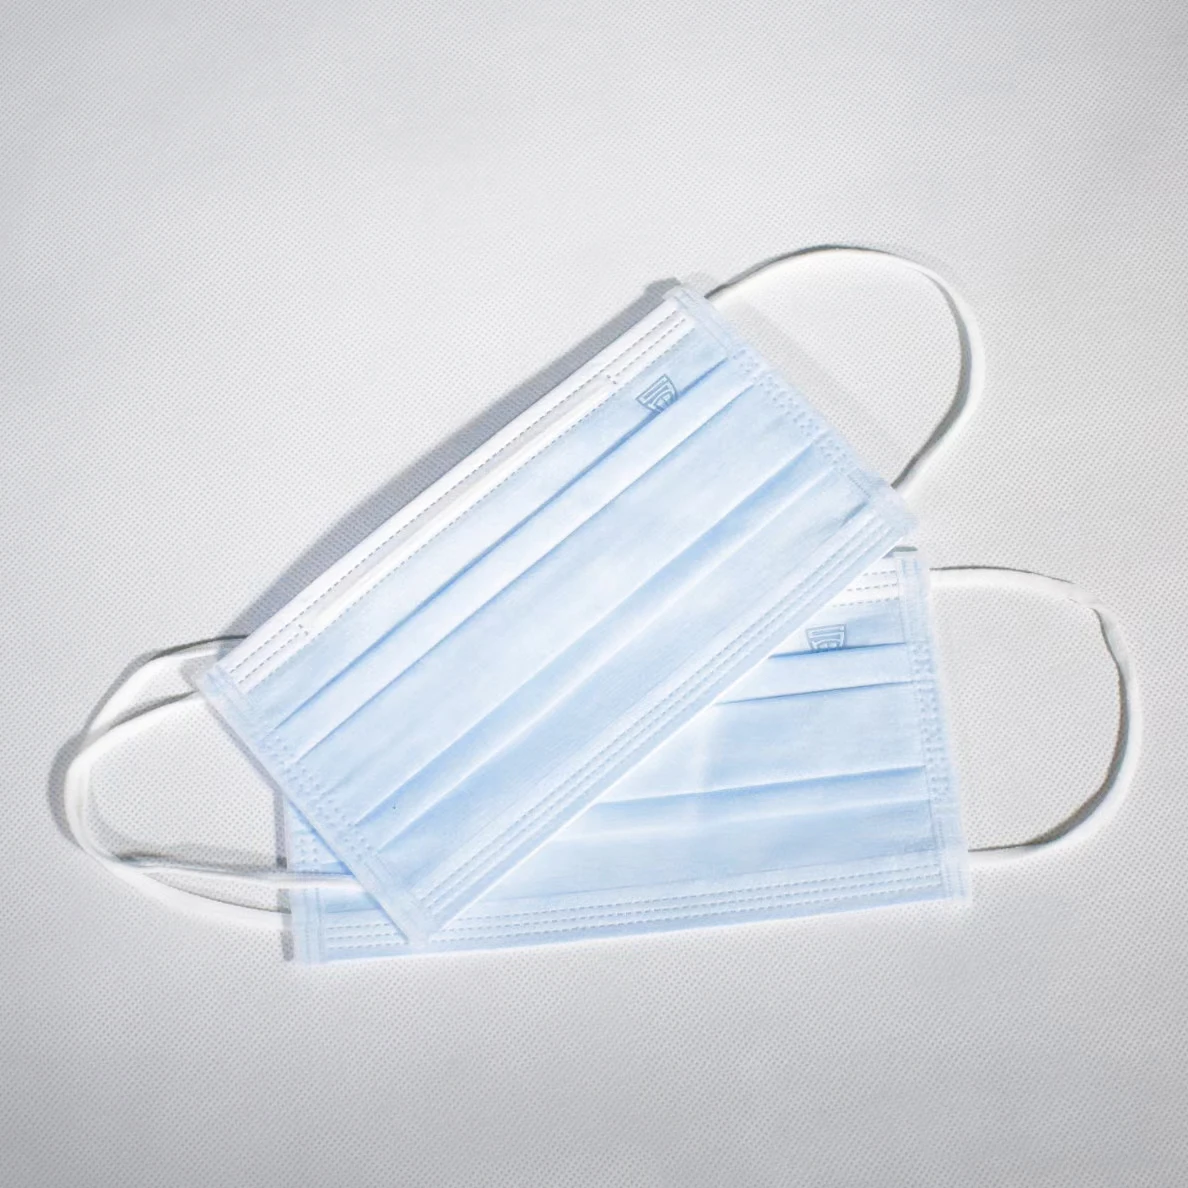 

50-400PCS Medical Disposable Face Mouth Masks Non-Woven Face Masks 3 Layers Filter Earloop Surgical Mask Breathable mascarilla